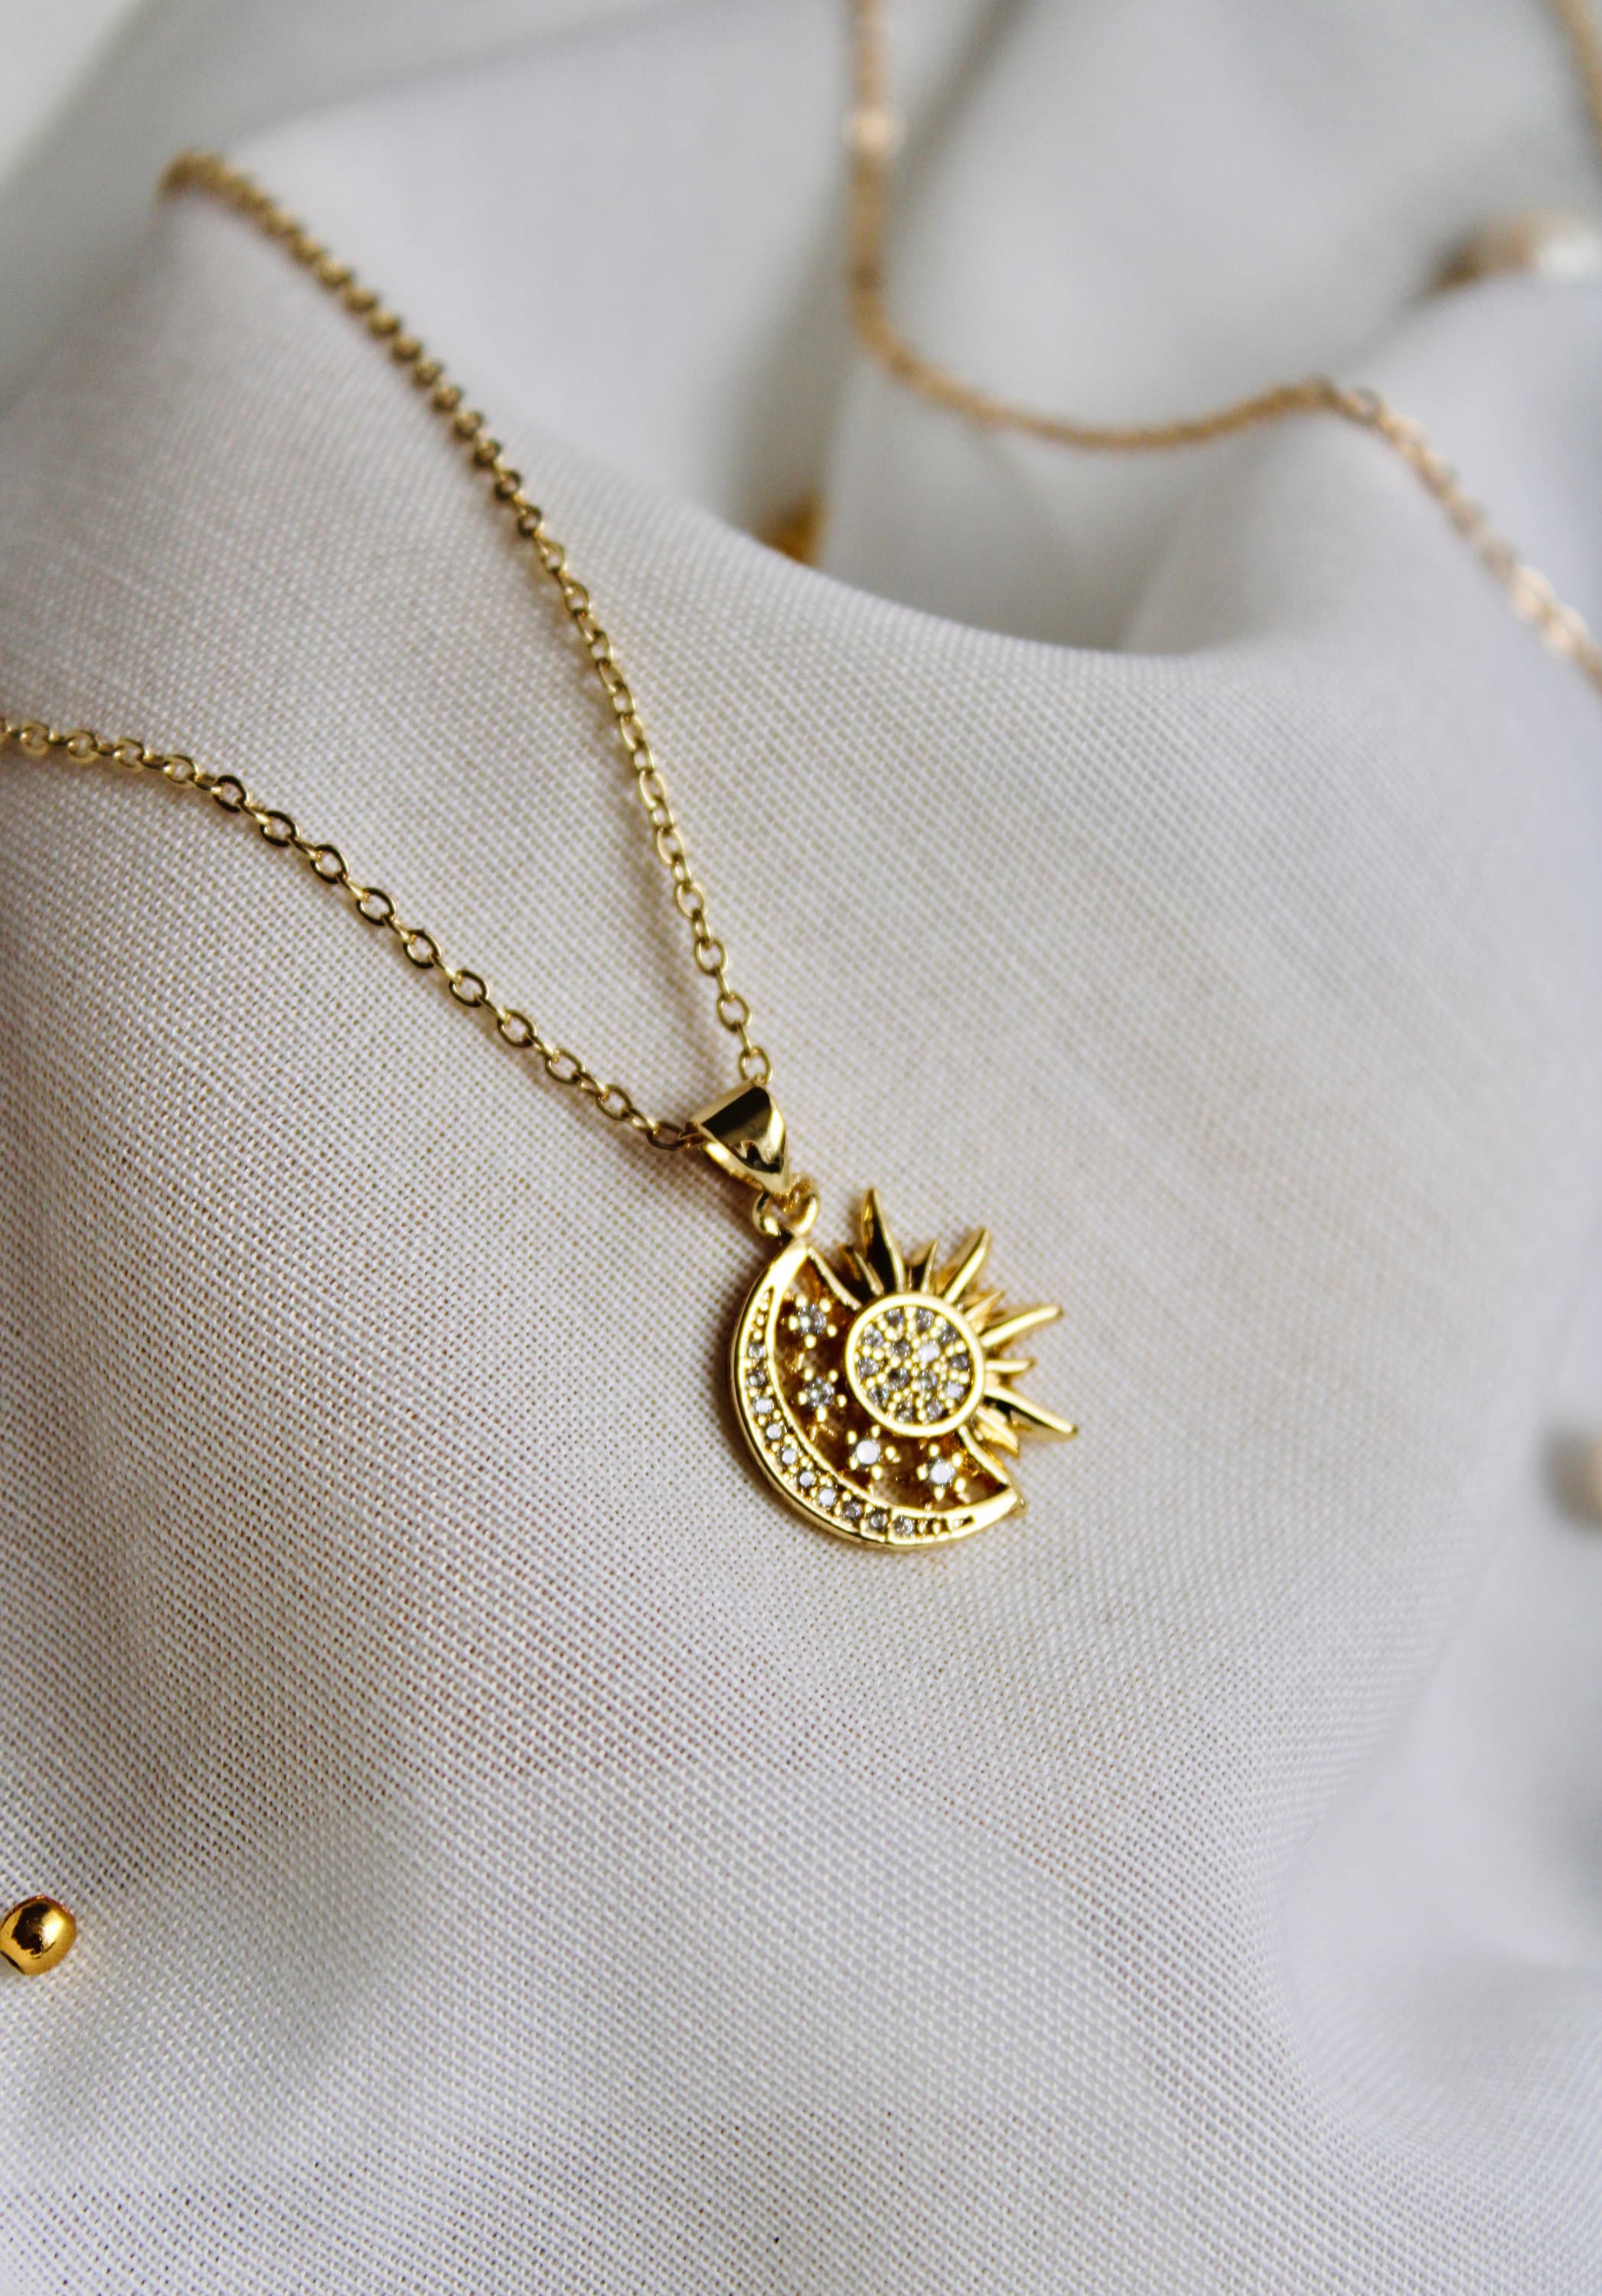 Sun Moon and Stars Necklace, Solar Eclipse Necklace, 18K Gold Filled Necklaces, Celestial Necklace, Eclipse Necklace, Valentines Day